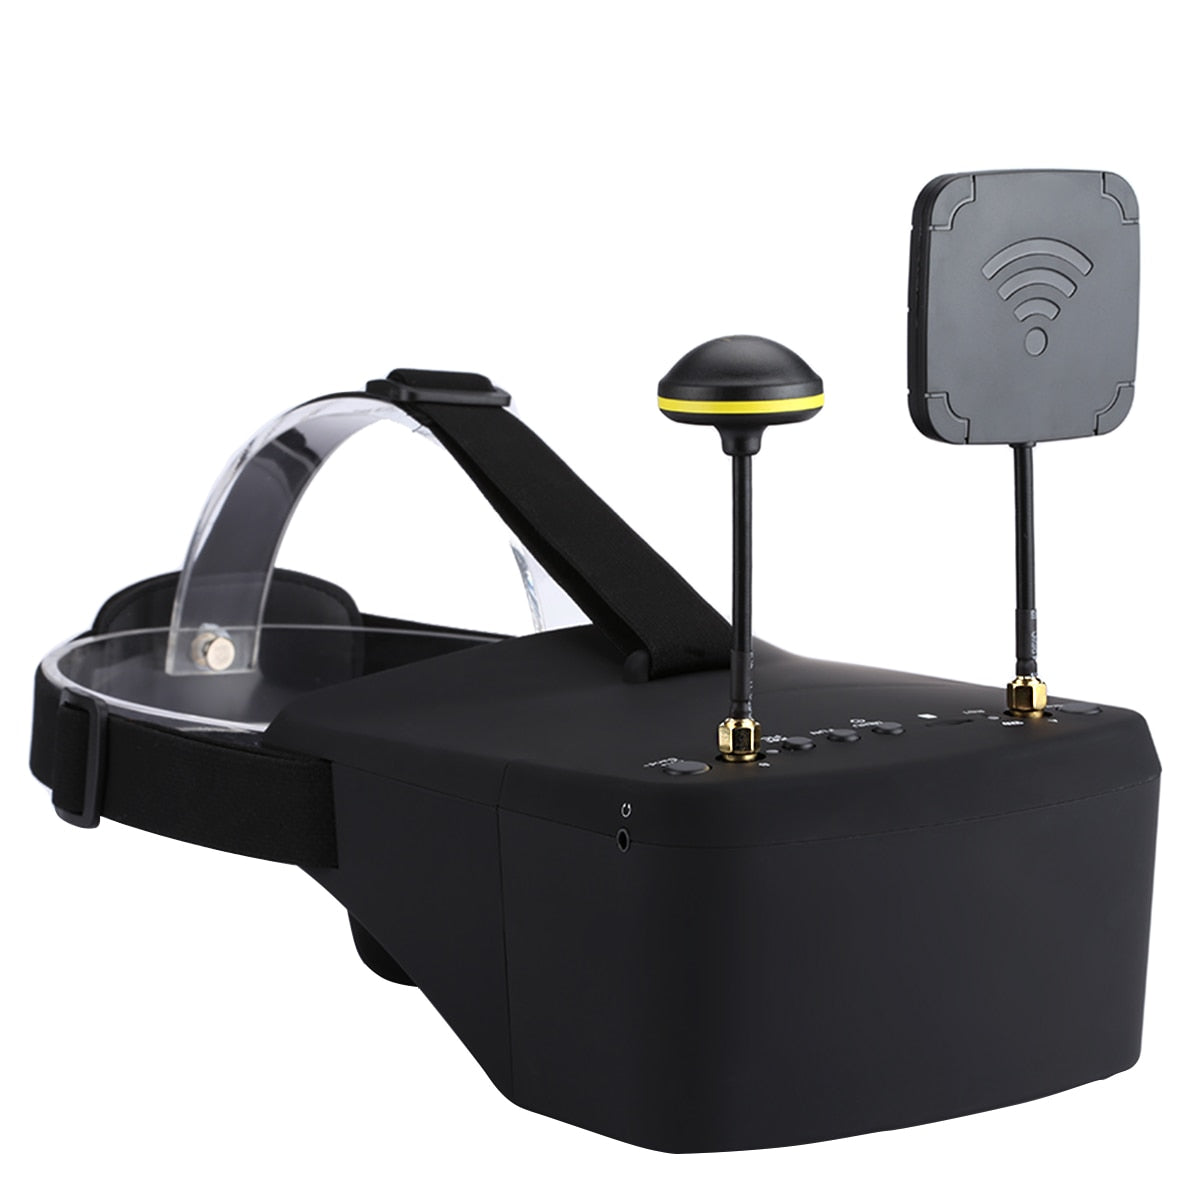 EV800D 5.8G 40CH 5 Inch 800*480 Video Headset HD DVR Diversity FPV Goggles With Battery - Alicetheluxe